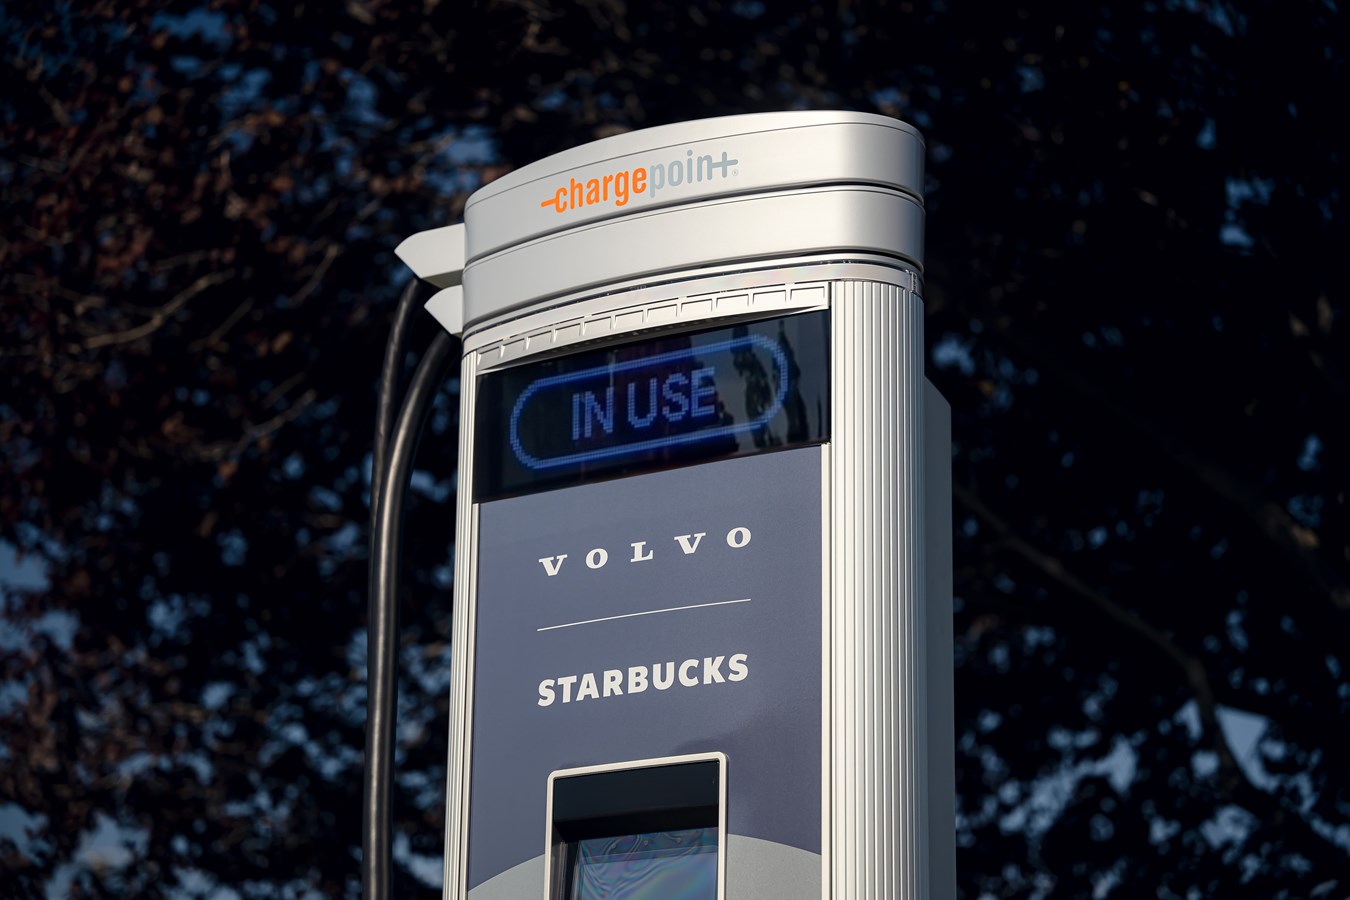 Volvo-SBUX-CP In Use